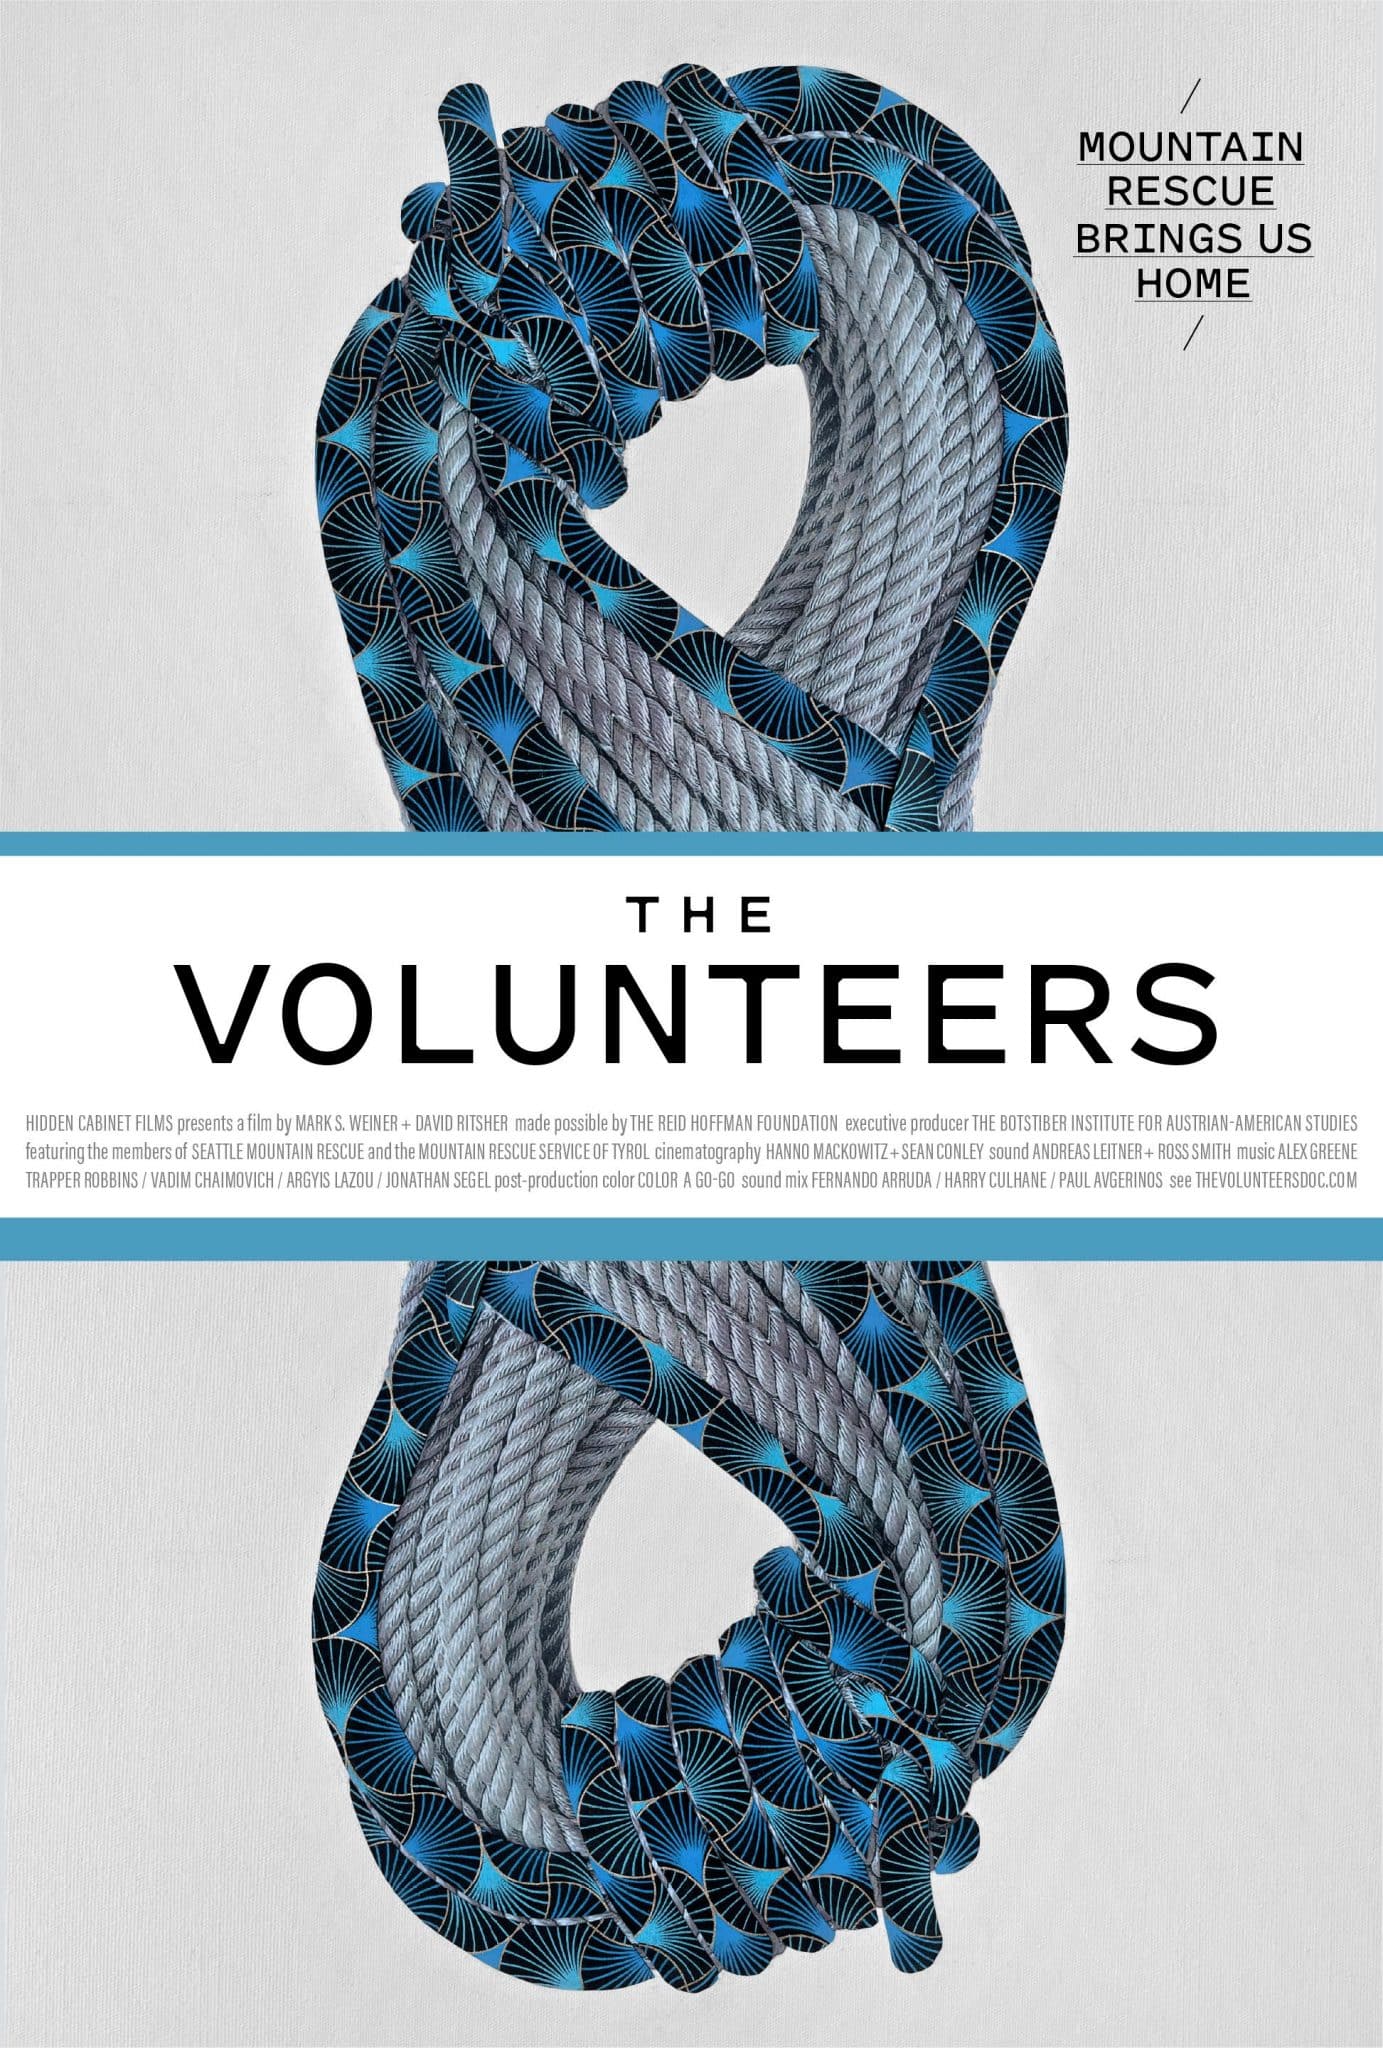 The Volunteers Mark Weiner Mountain Rescue Brings Us Home Movie Poster